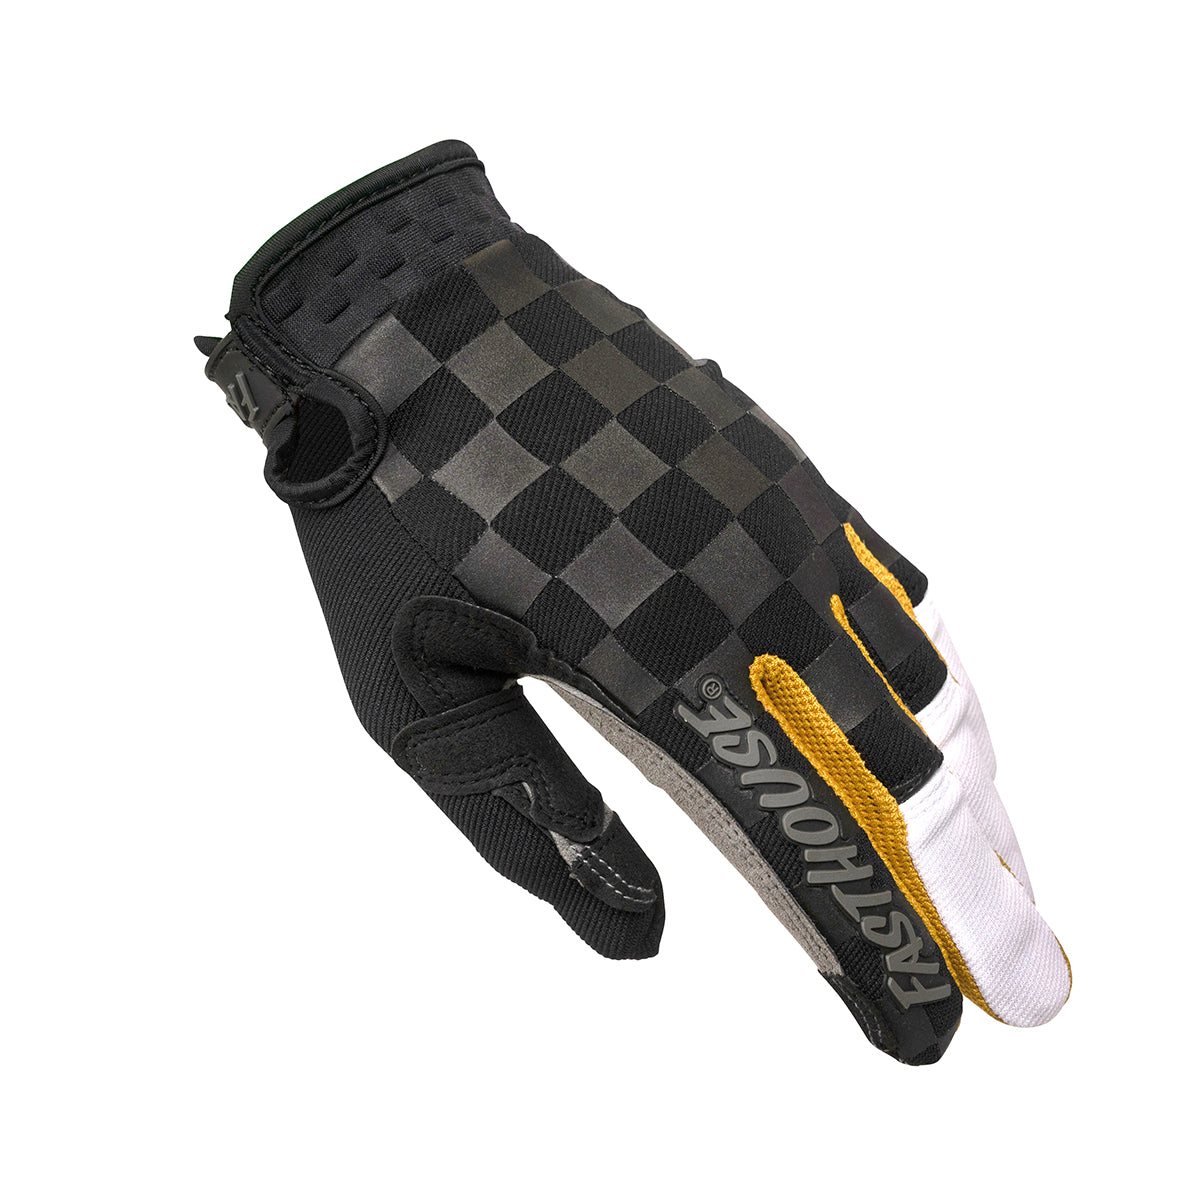 Speed Style Haven Youth Glove - Black/White